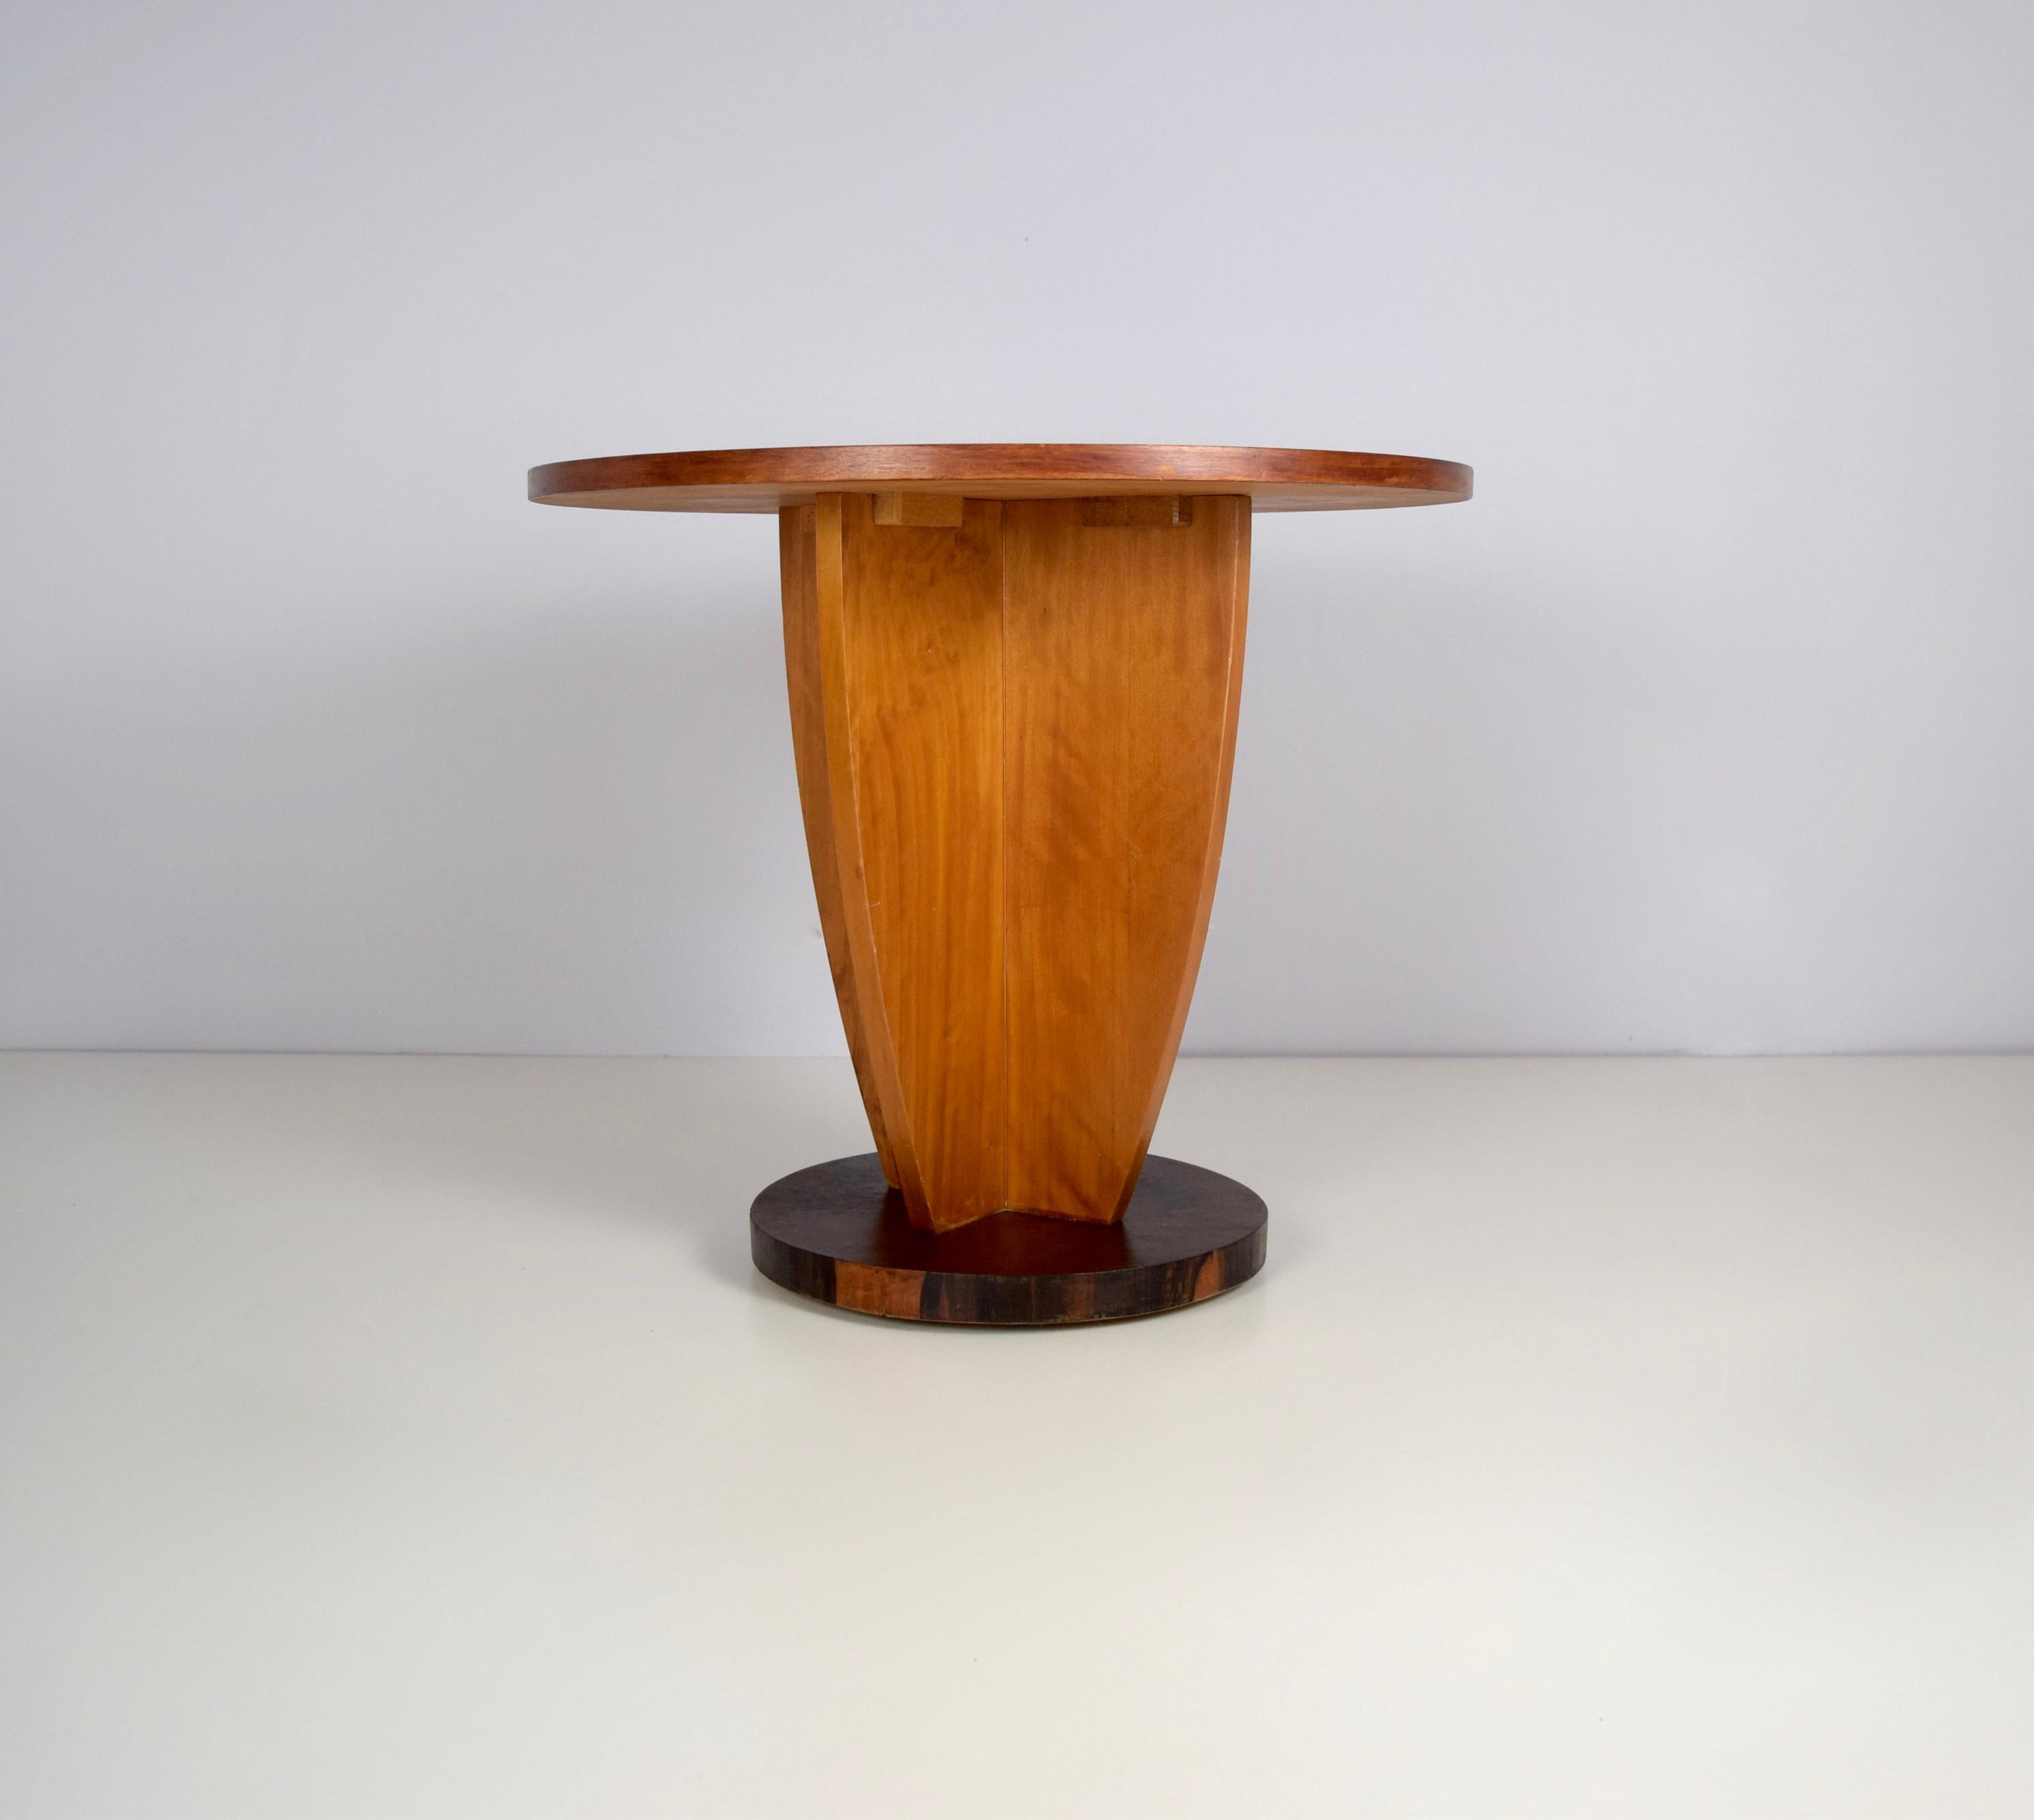 Art Deco coffee table in oak and Coromandel, The Hague School, 1930s. It has a round top with a foot with three equal sides. The dark wood is Coromandel wood. The design is classy and modest, typical for Dutch Art Deco, The Hague school. It is in